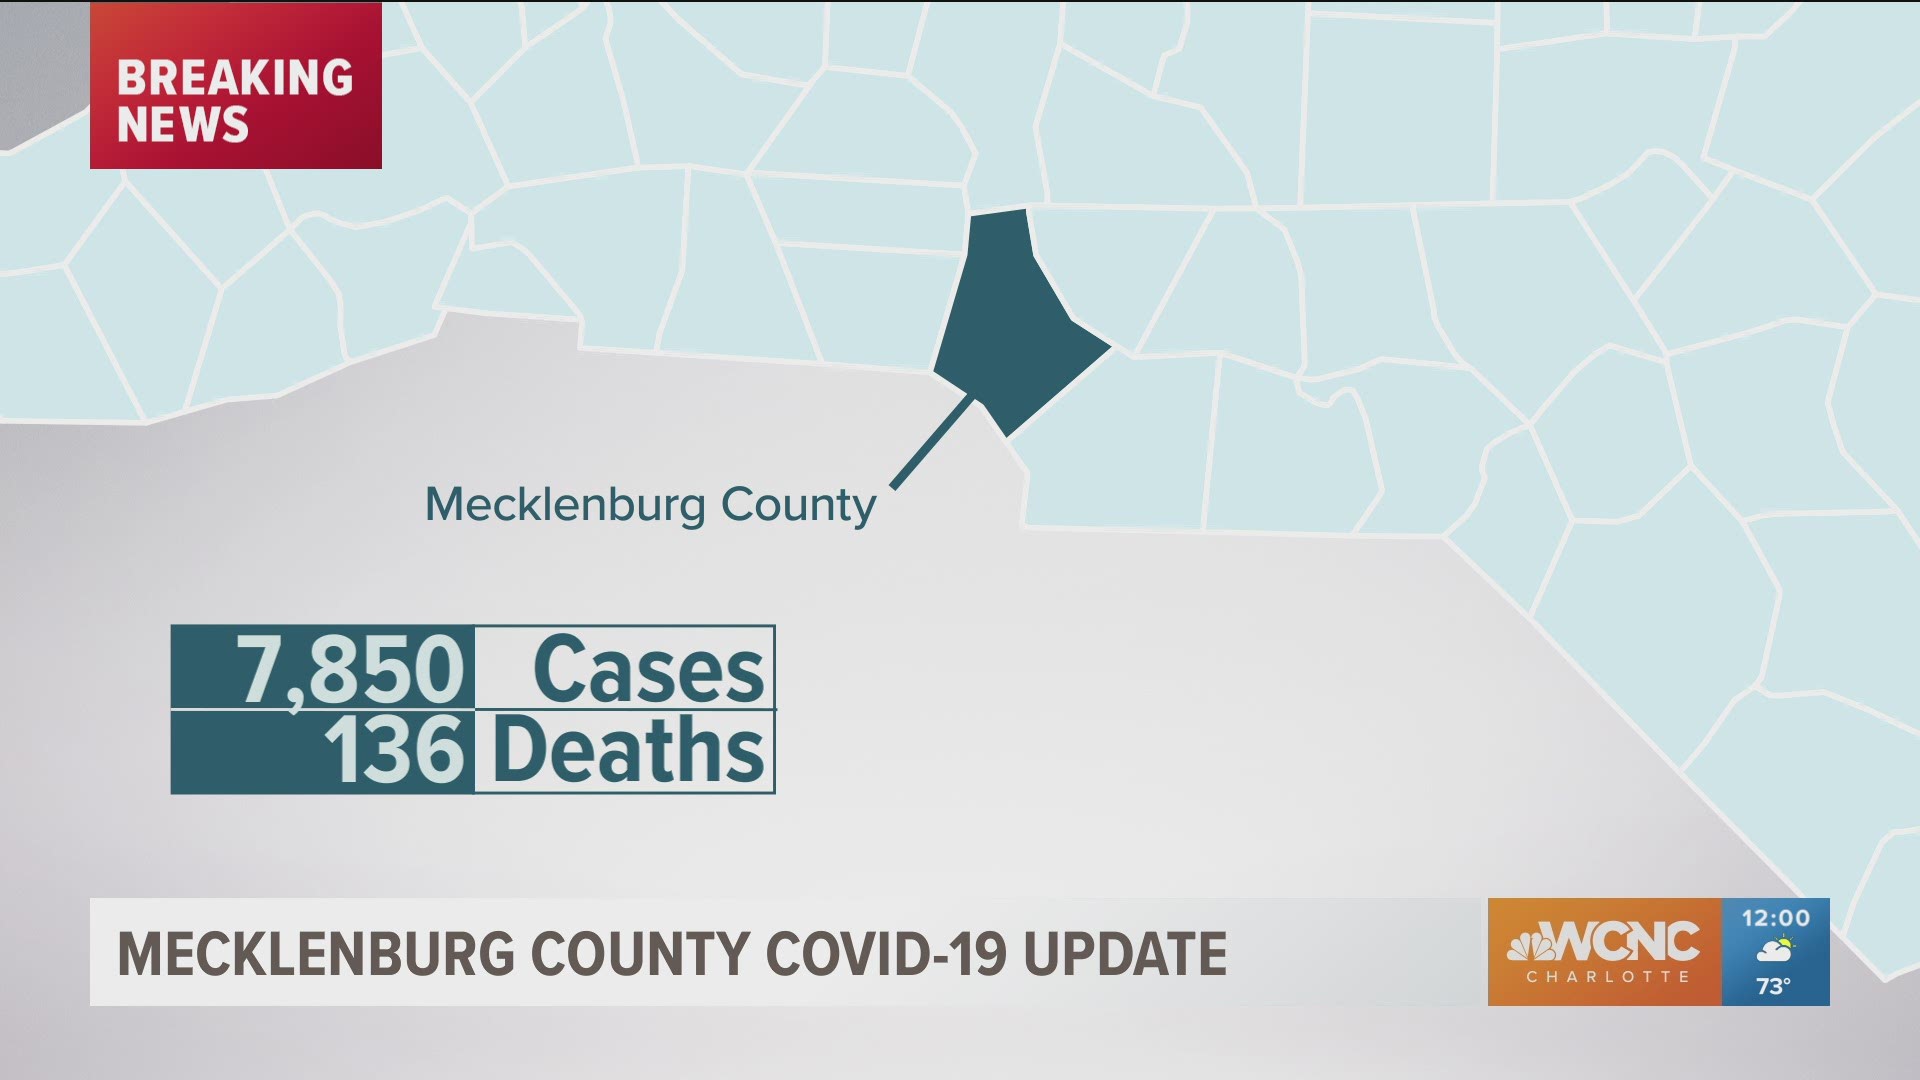 Mecklenburg County has nearly 8,000 cases of COVID-19 and 136 deaths related to the virus, according to Health Director Gibbie Harris.